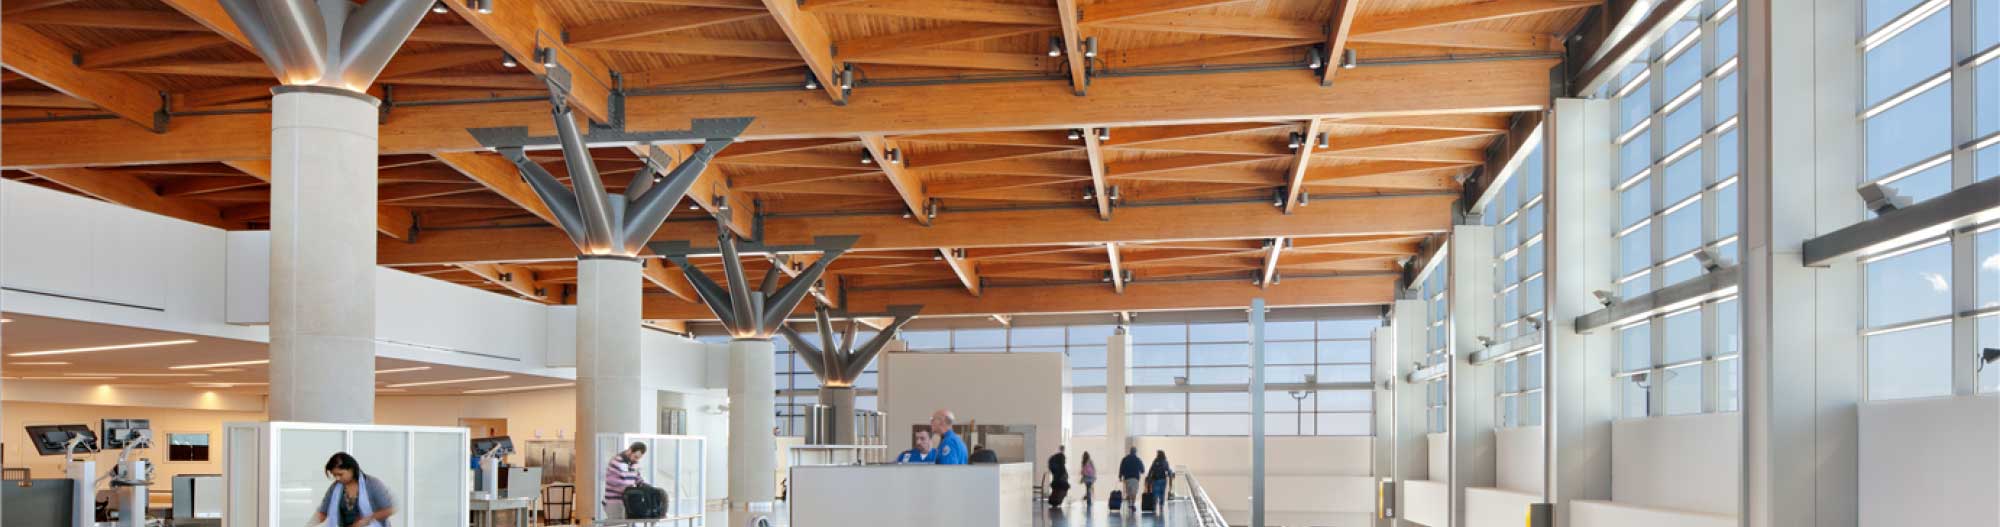 Interior of airport featuring wood construction